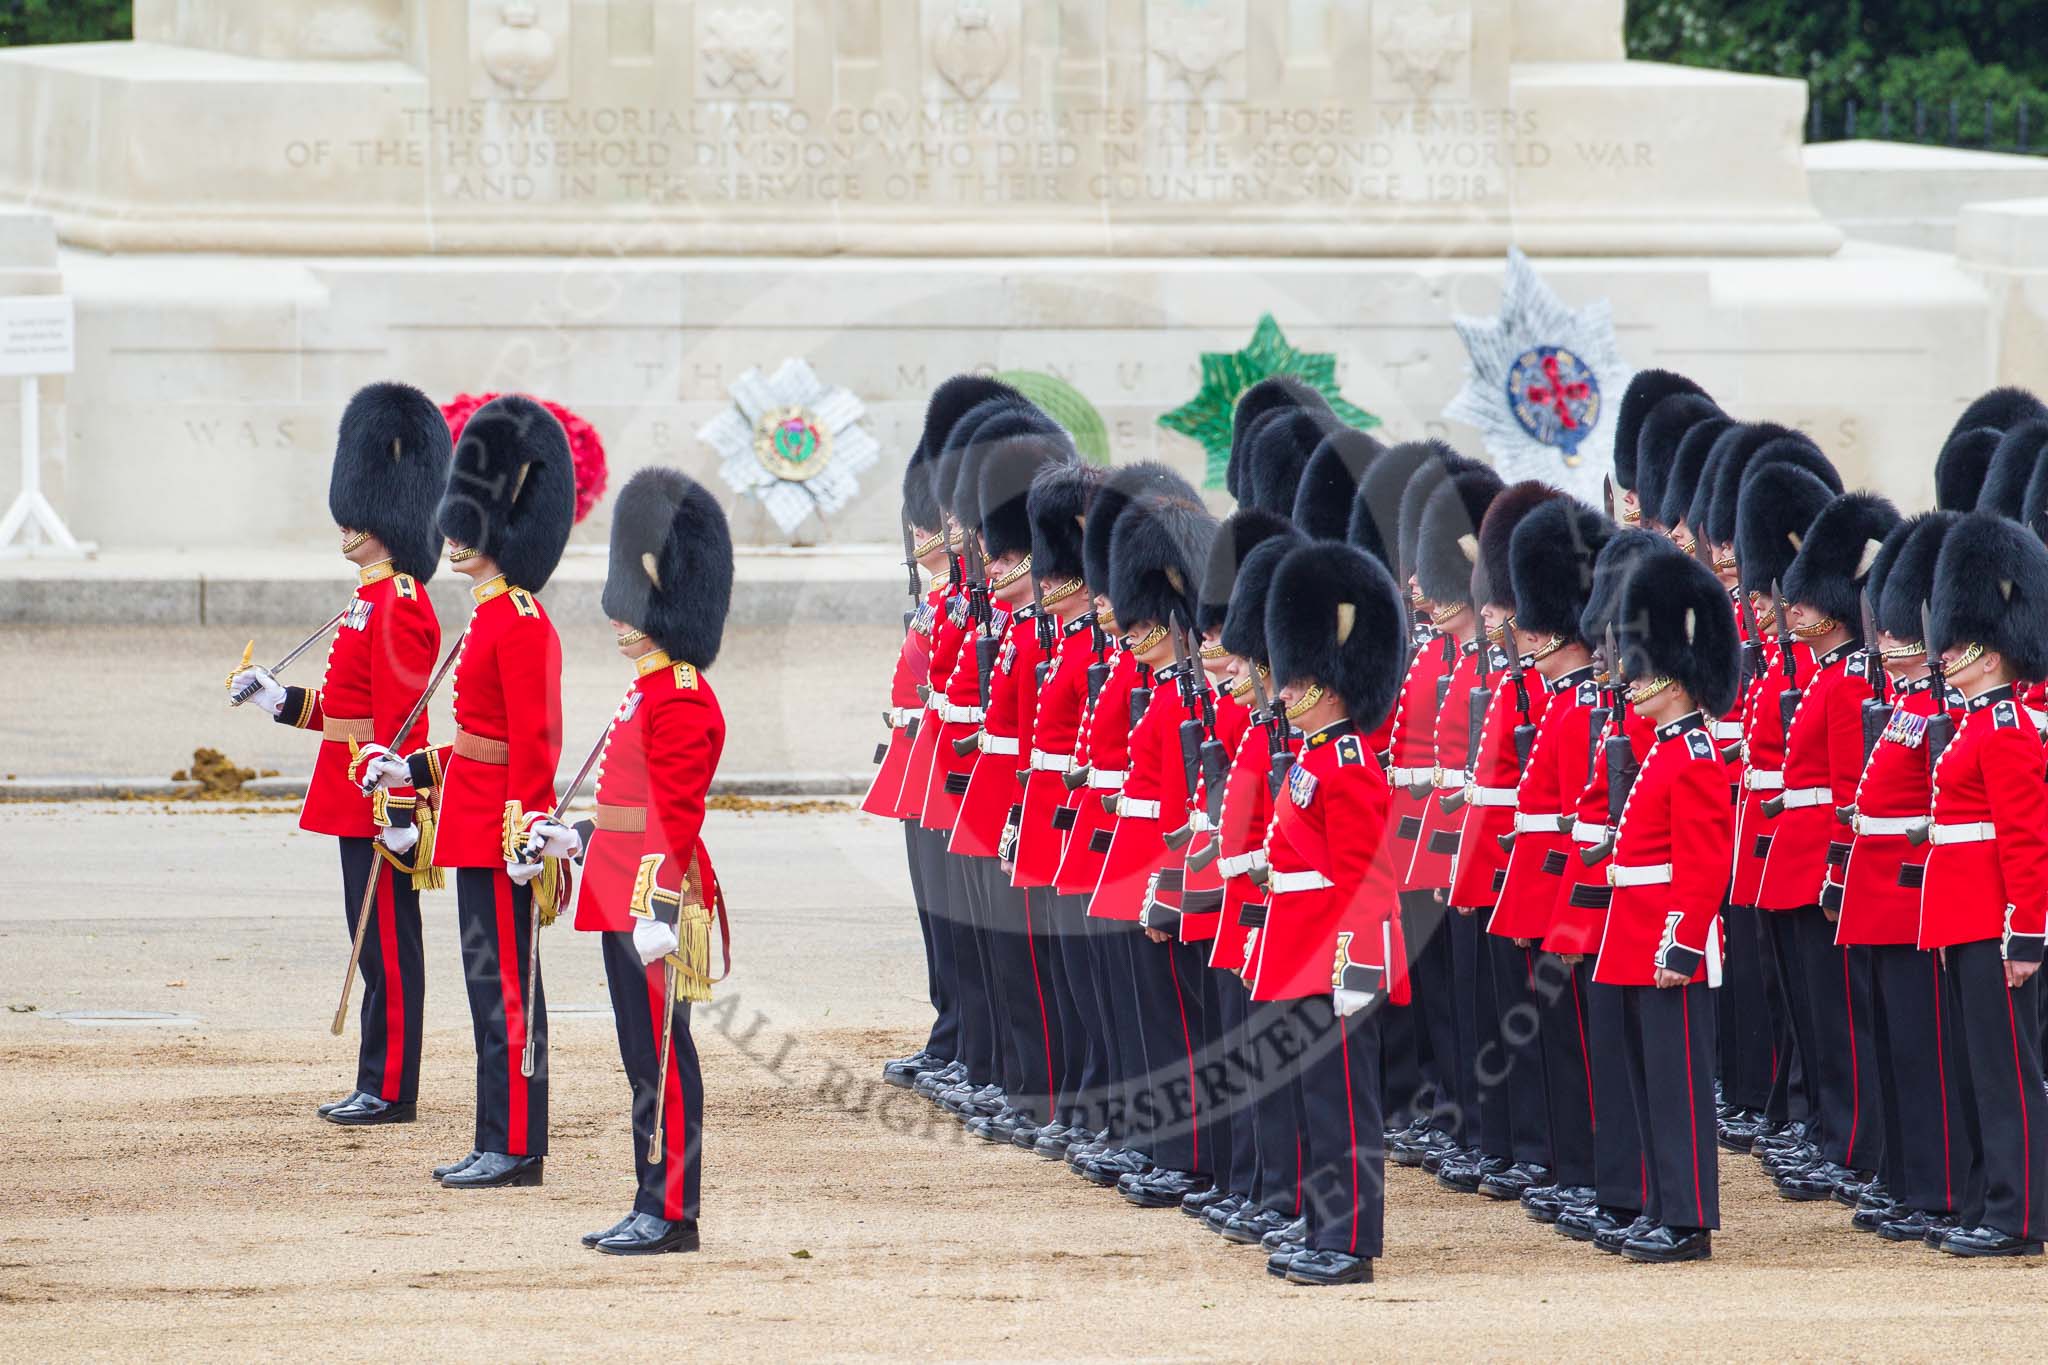 Trooping the Colour 2012: The troops are ready for the March Off - here No. 4 Guard, Nijmegen Company Grenadier Guards, in front of the Guards Memorial..
Horse Guards Parade, Westminster,
London SW1,

United Kingdom,
on 16 June 2012 at 12:08, image #645